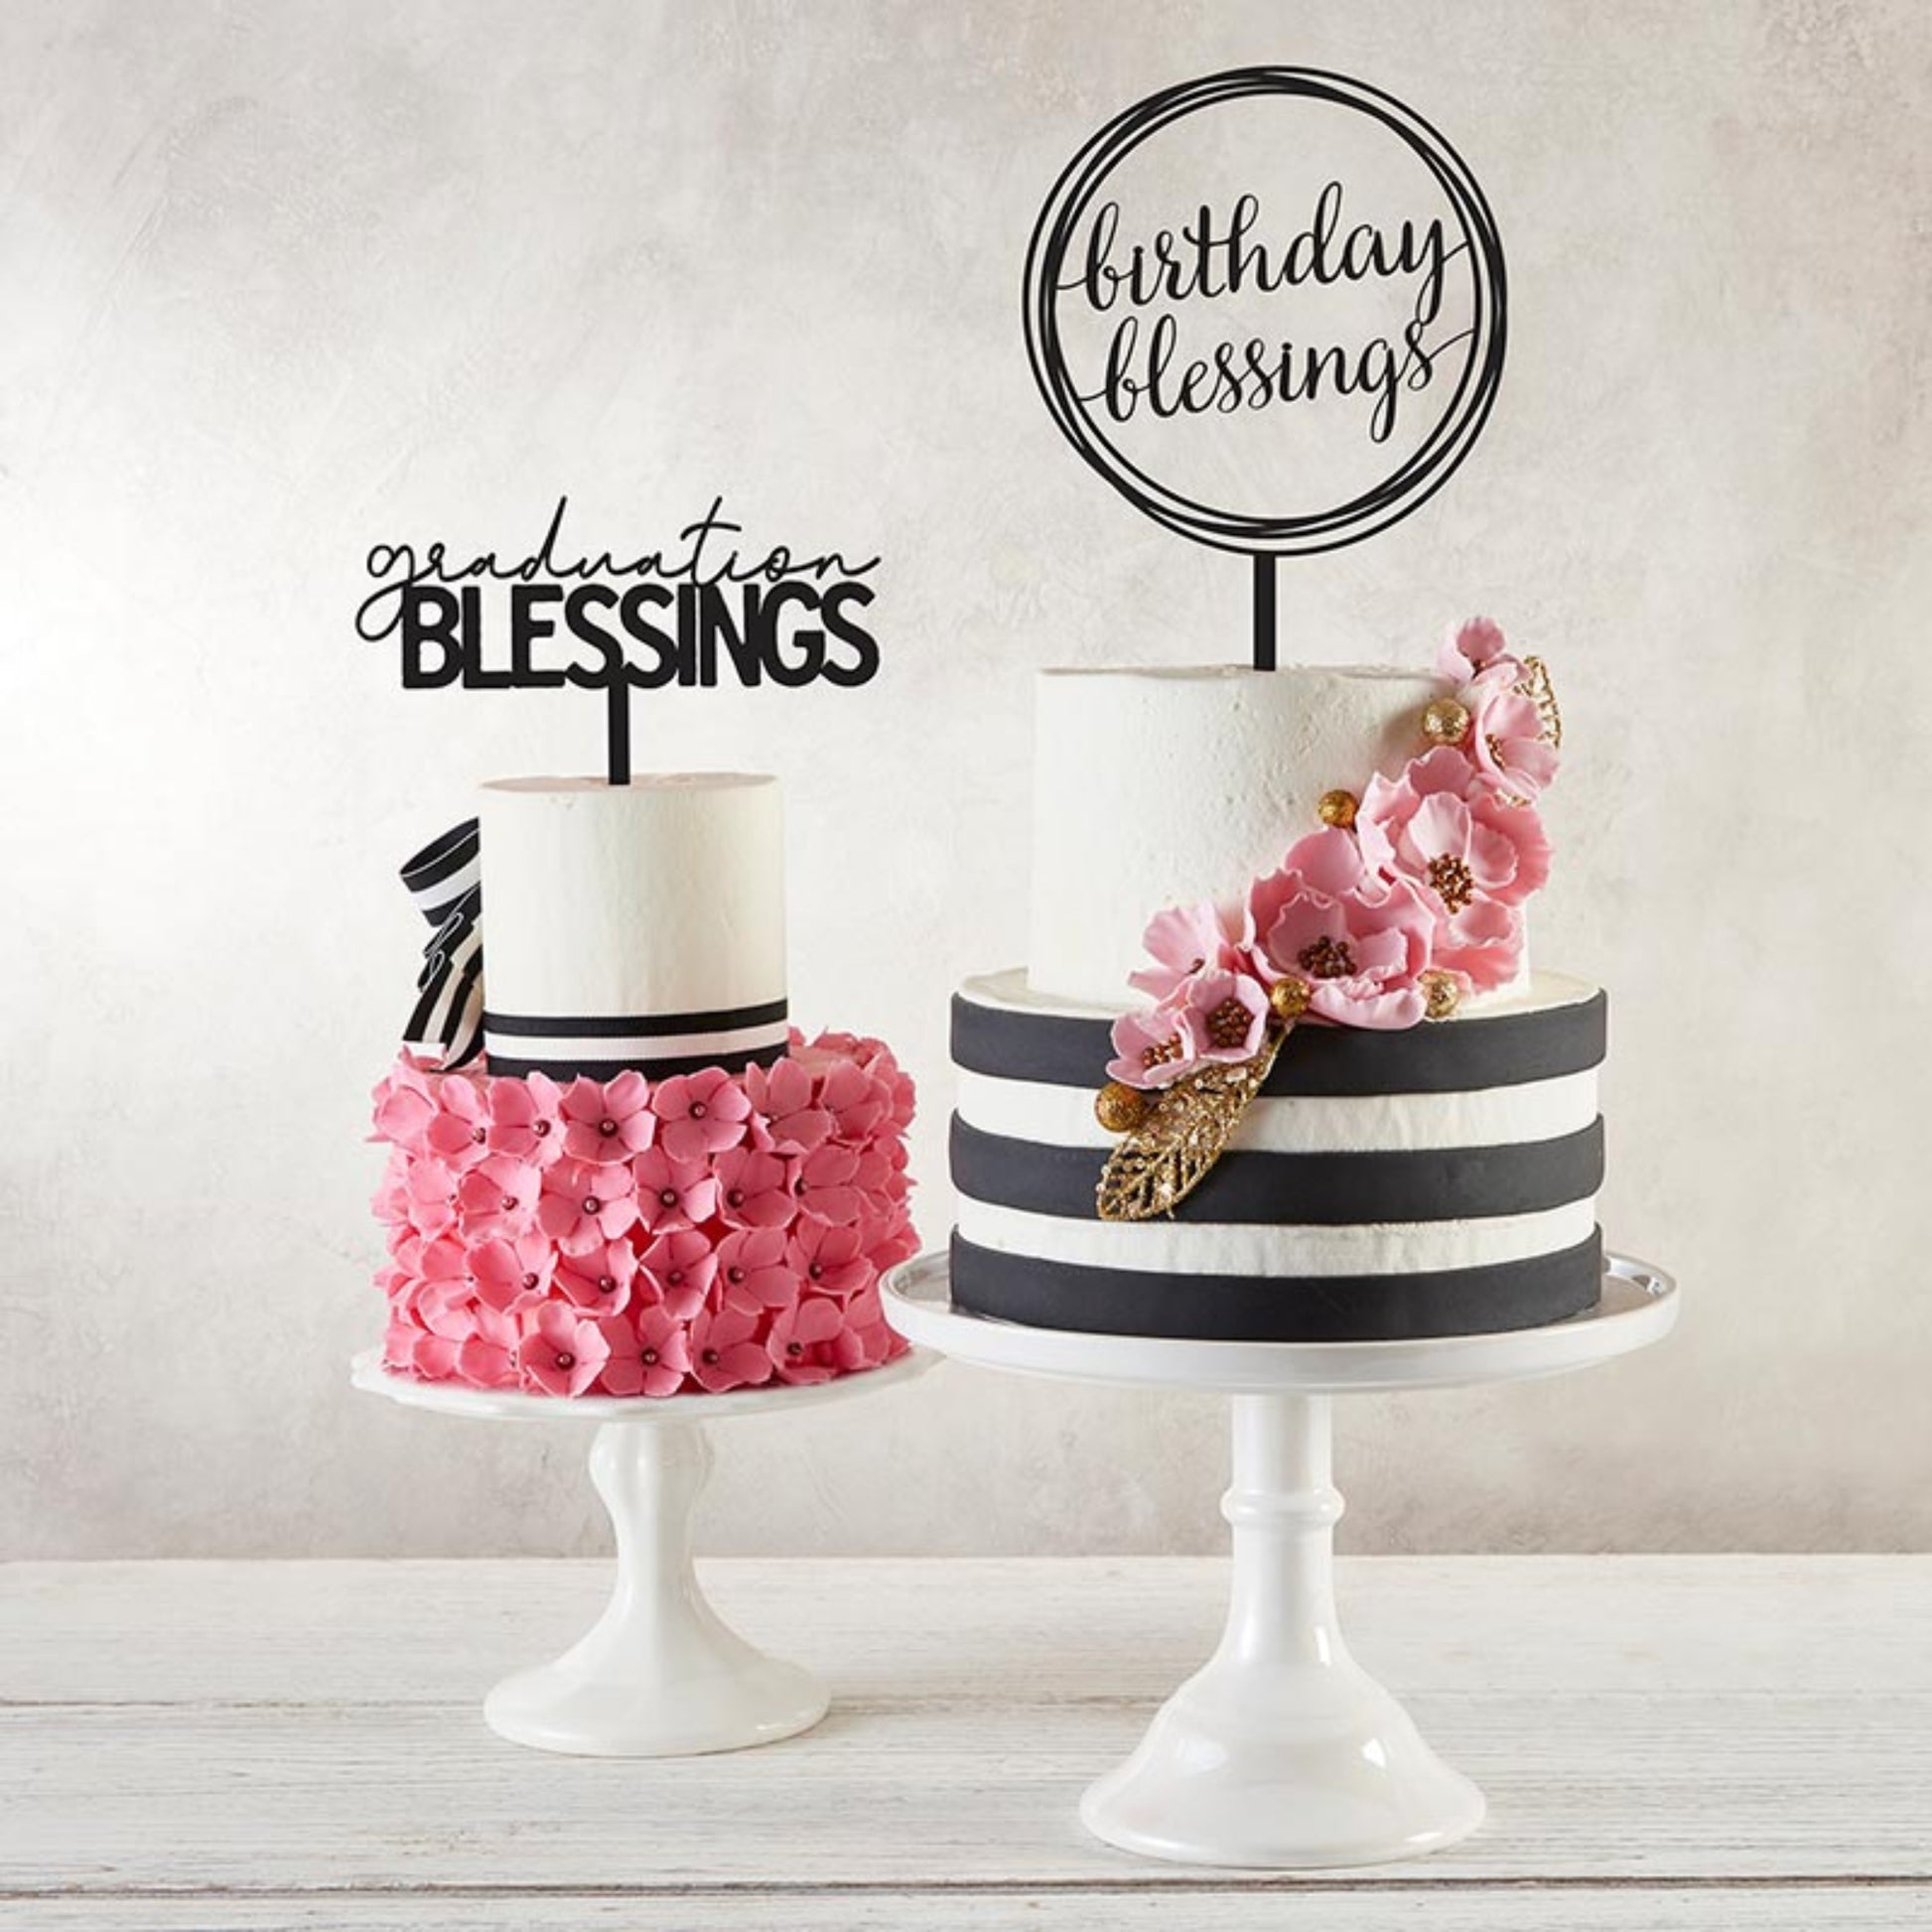 Acrylic Cake Topper - Birthday Blessings Cake Decoration | shown with graduation BLESSINGS cake topper | oak7west.com